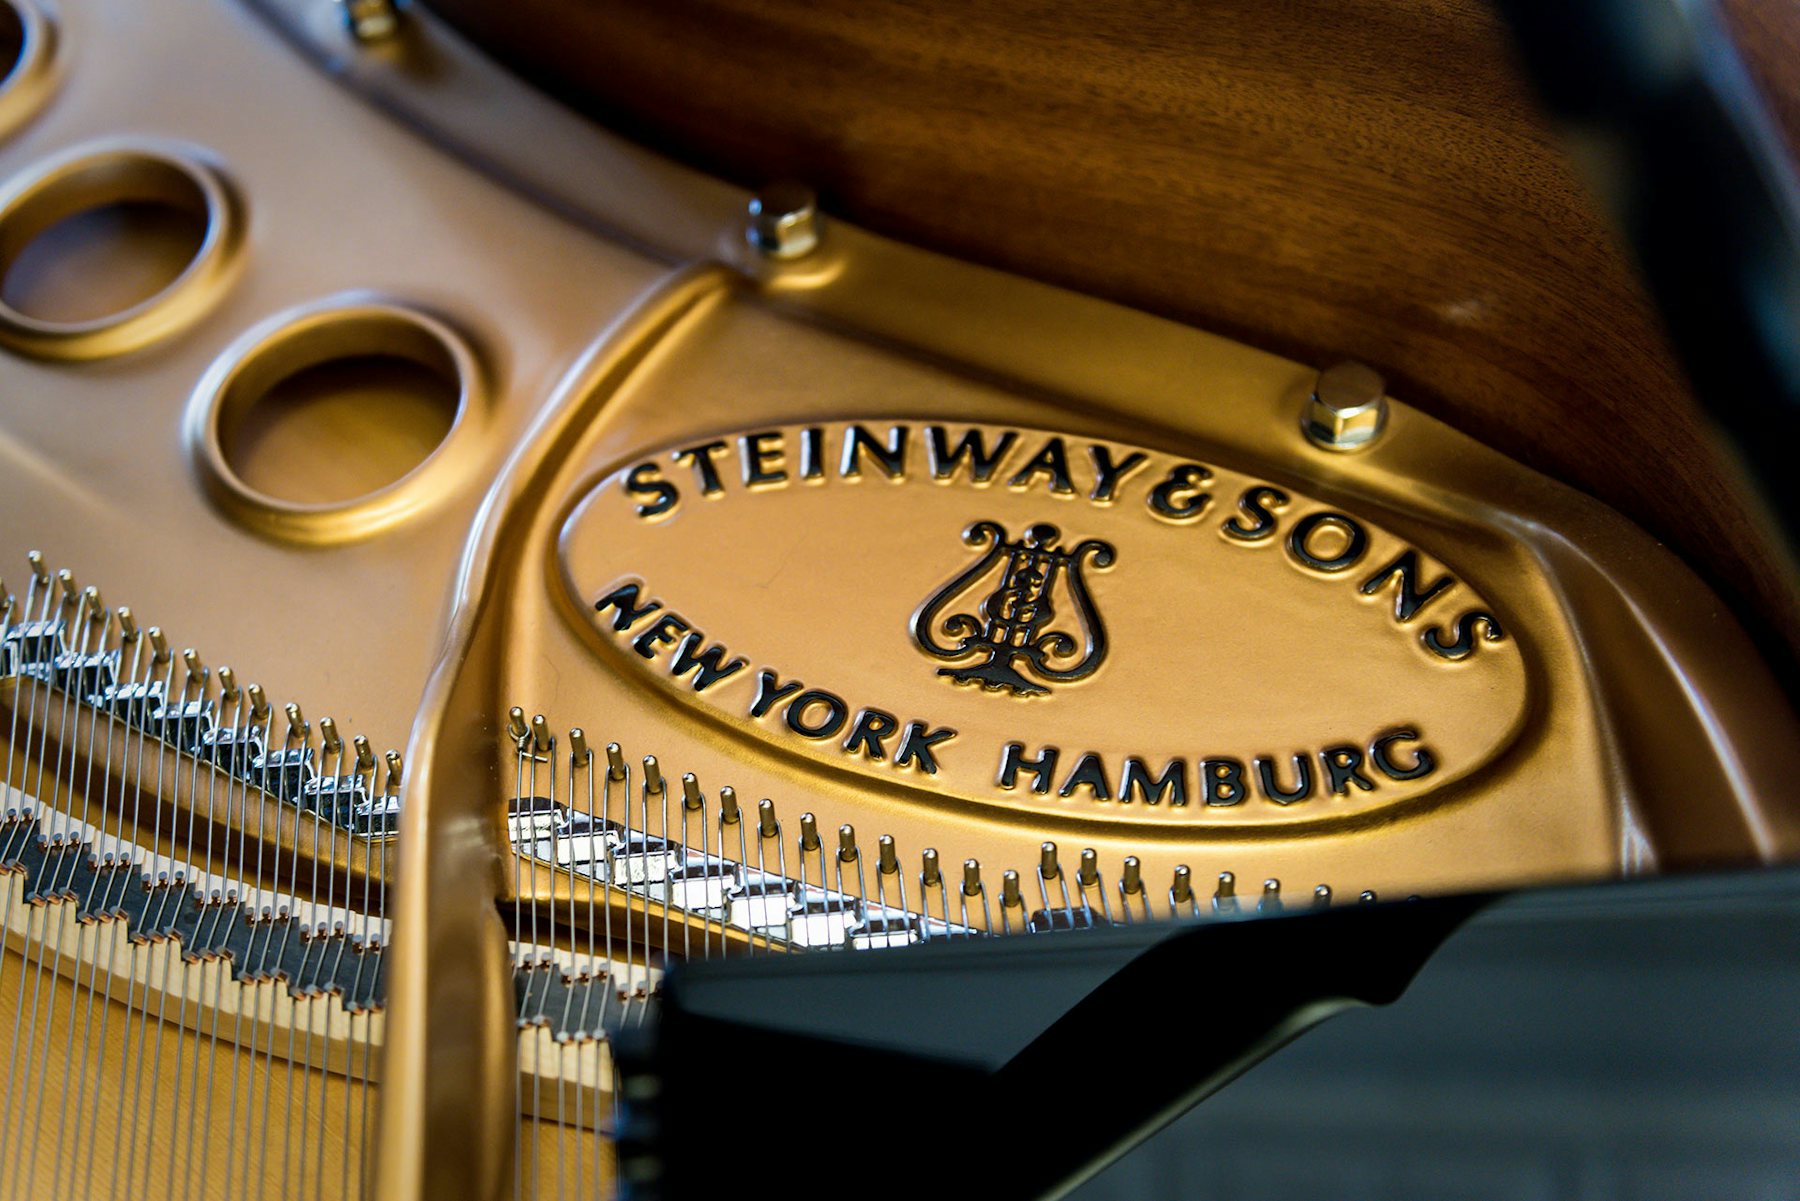 Close up of Steinway and Sons logo on the piano